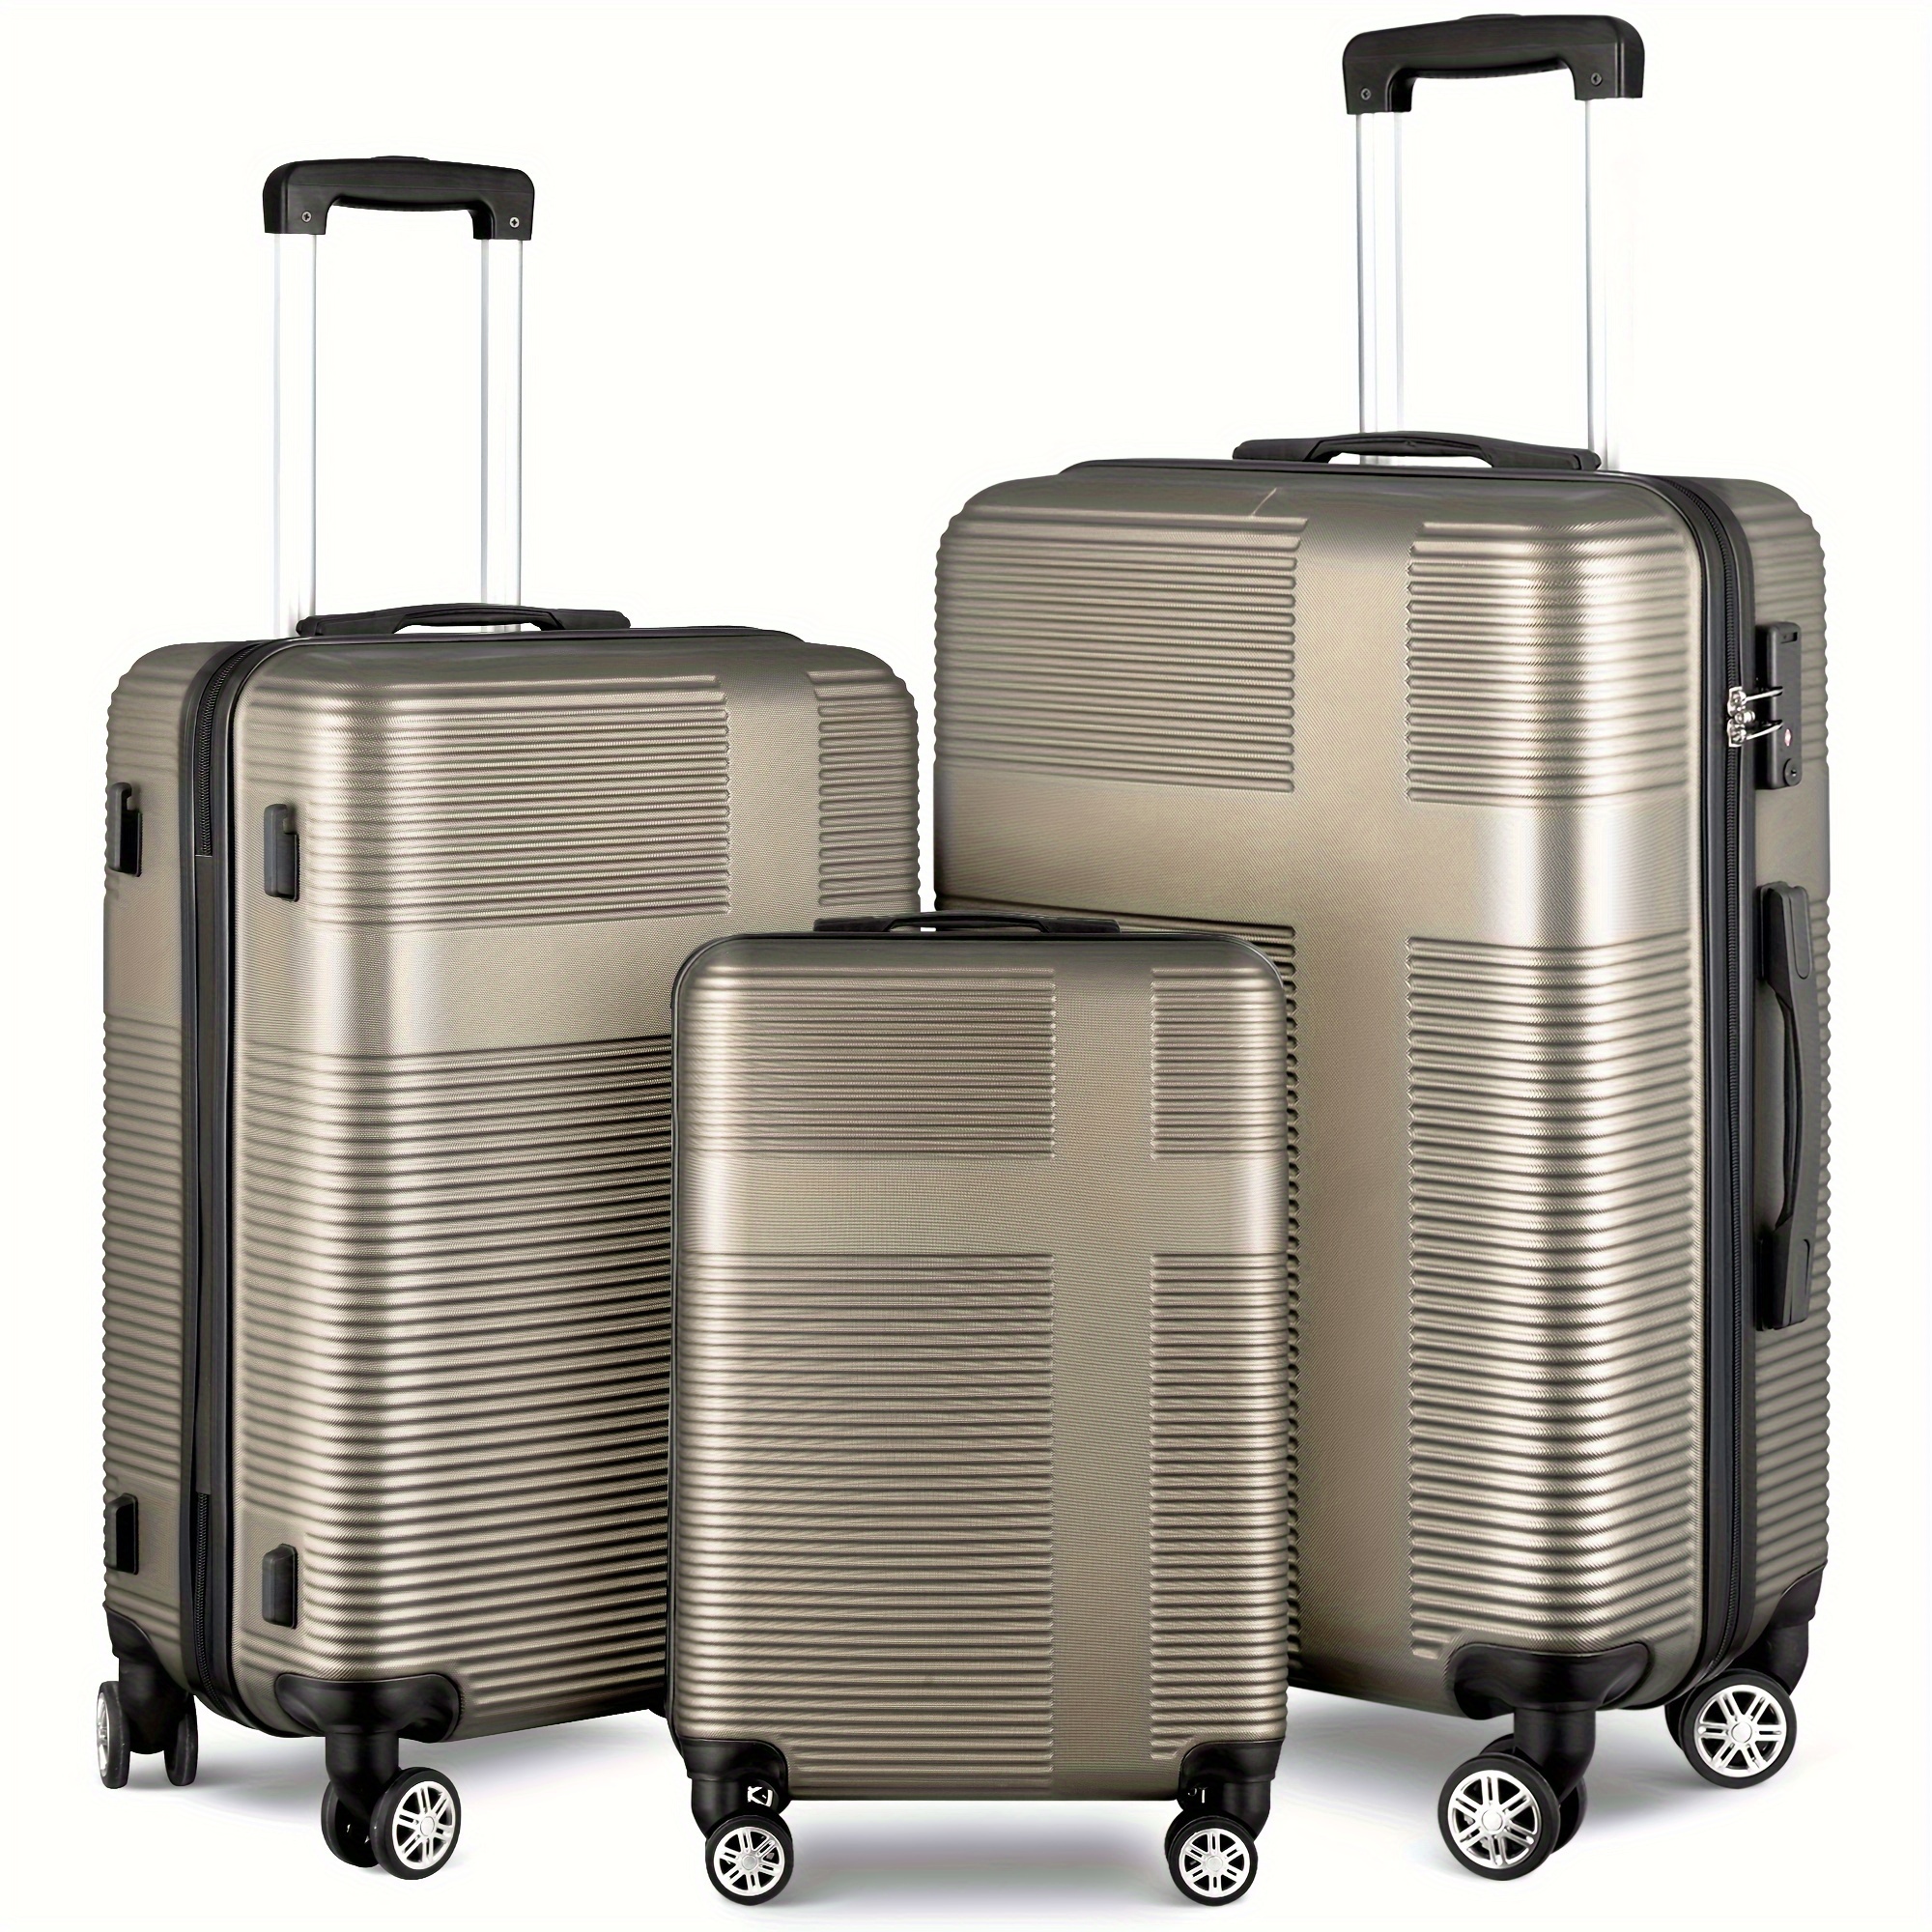 

3-piece Champagne Hardside Luggage Set, 20/24/28 Inch , Fashionable Travel Trolley Cases With 360° Spinner Wheels, Telescoping Handle, Nested Storage - Stylish Travel Gear